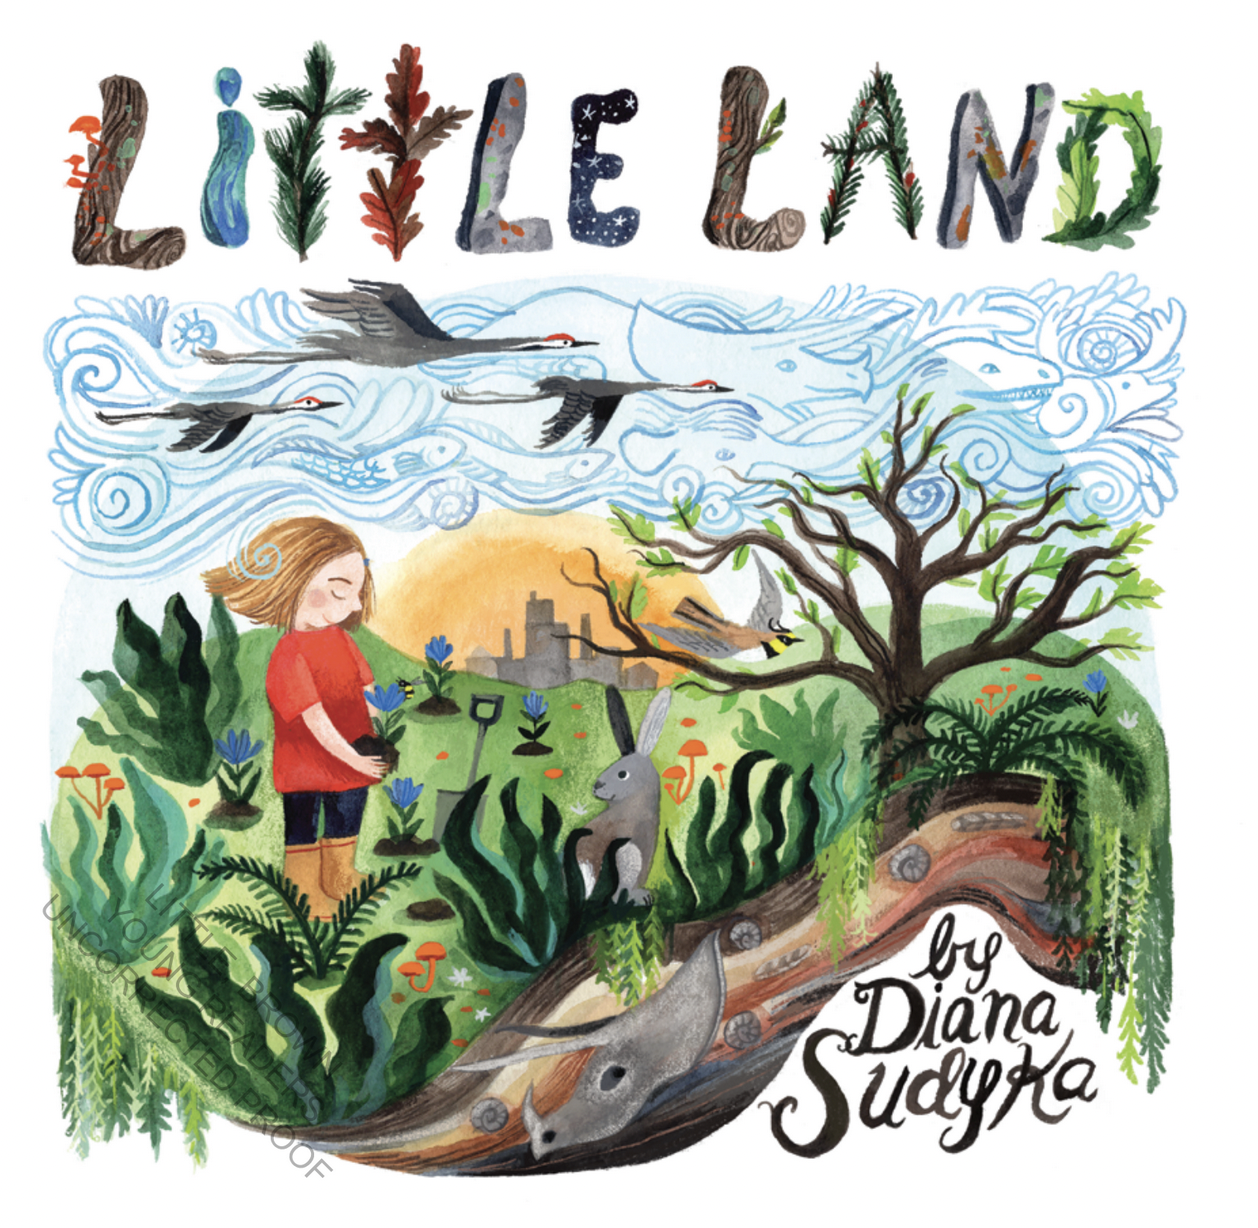 “… A relationship of reciprocity with the Earth.” Diana Sudyka Discusses Her New Picture Book, Little Land